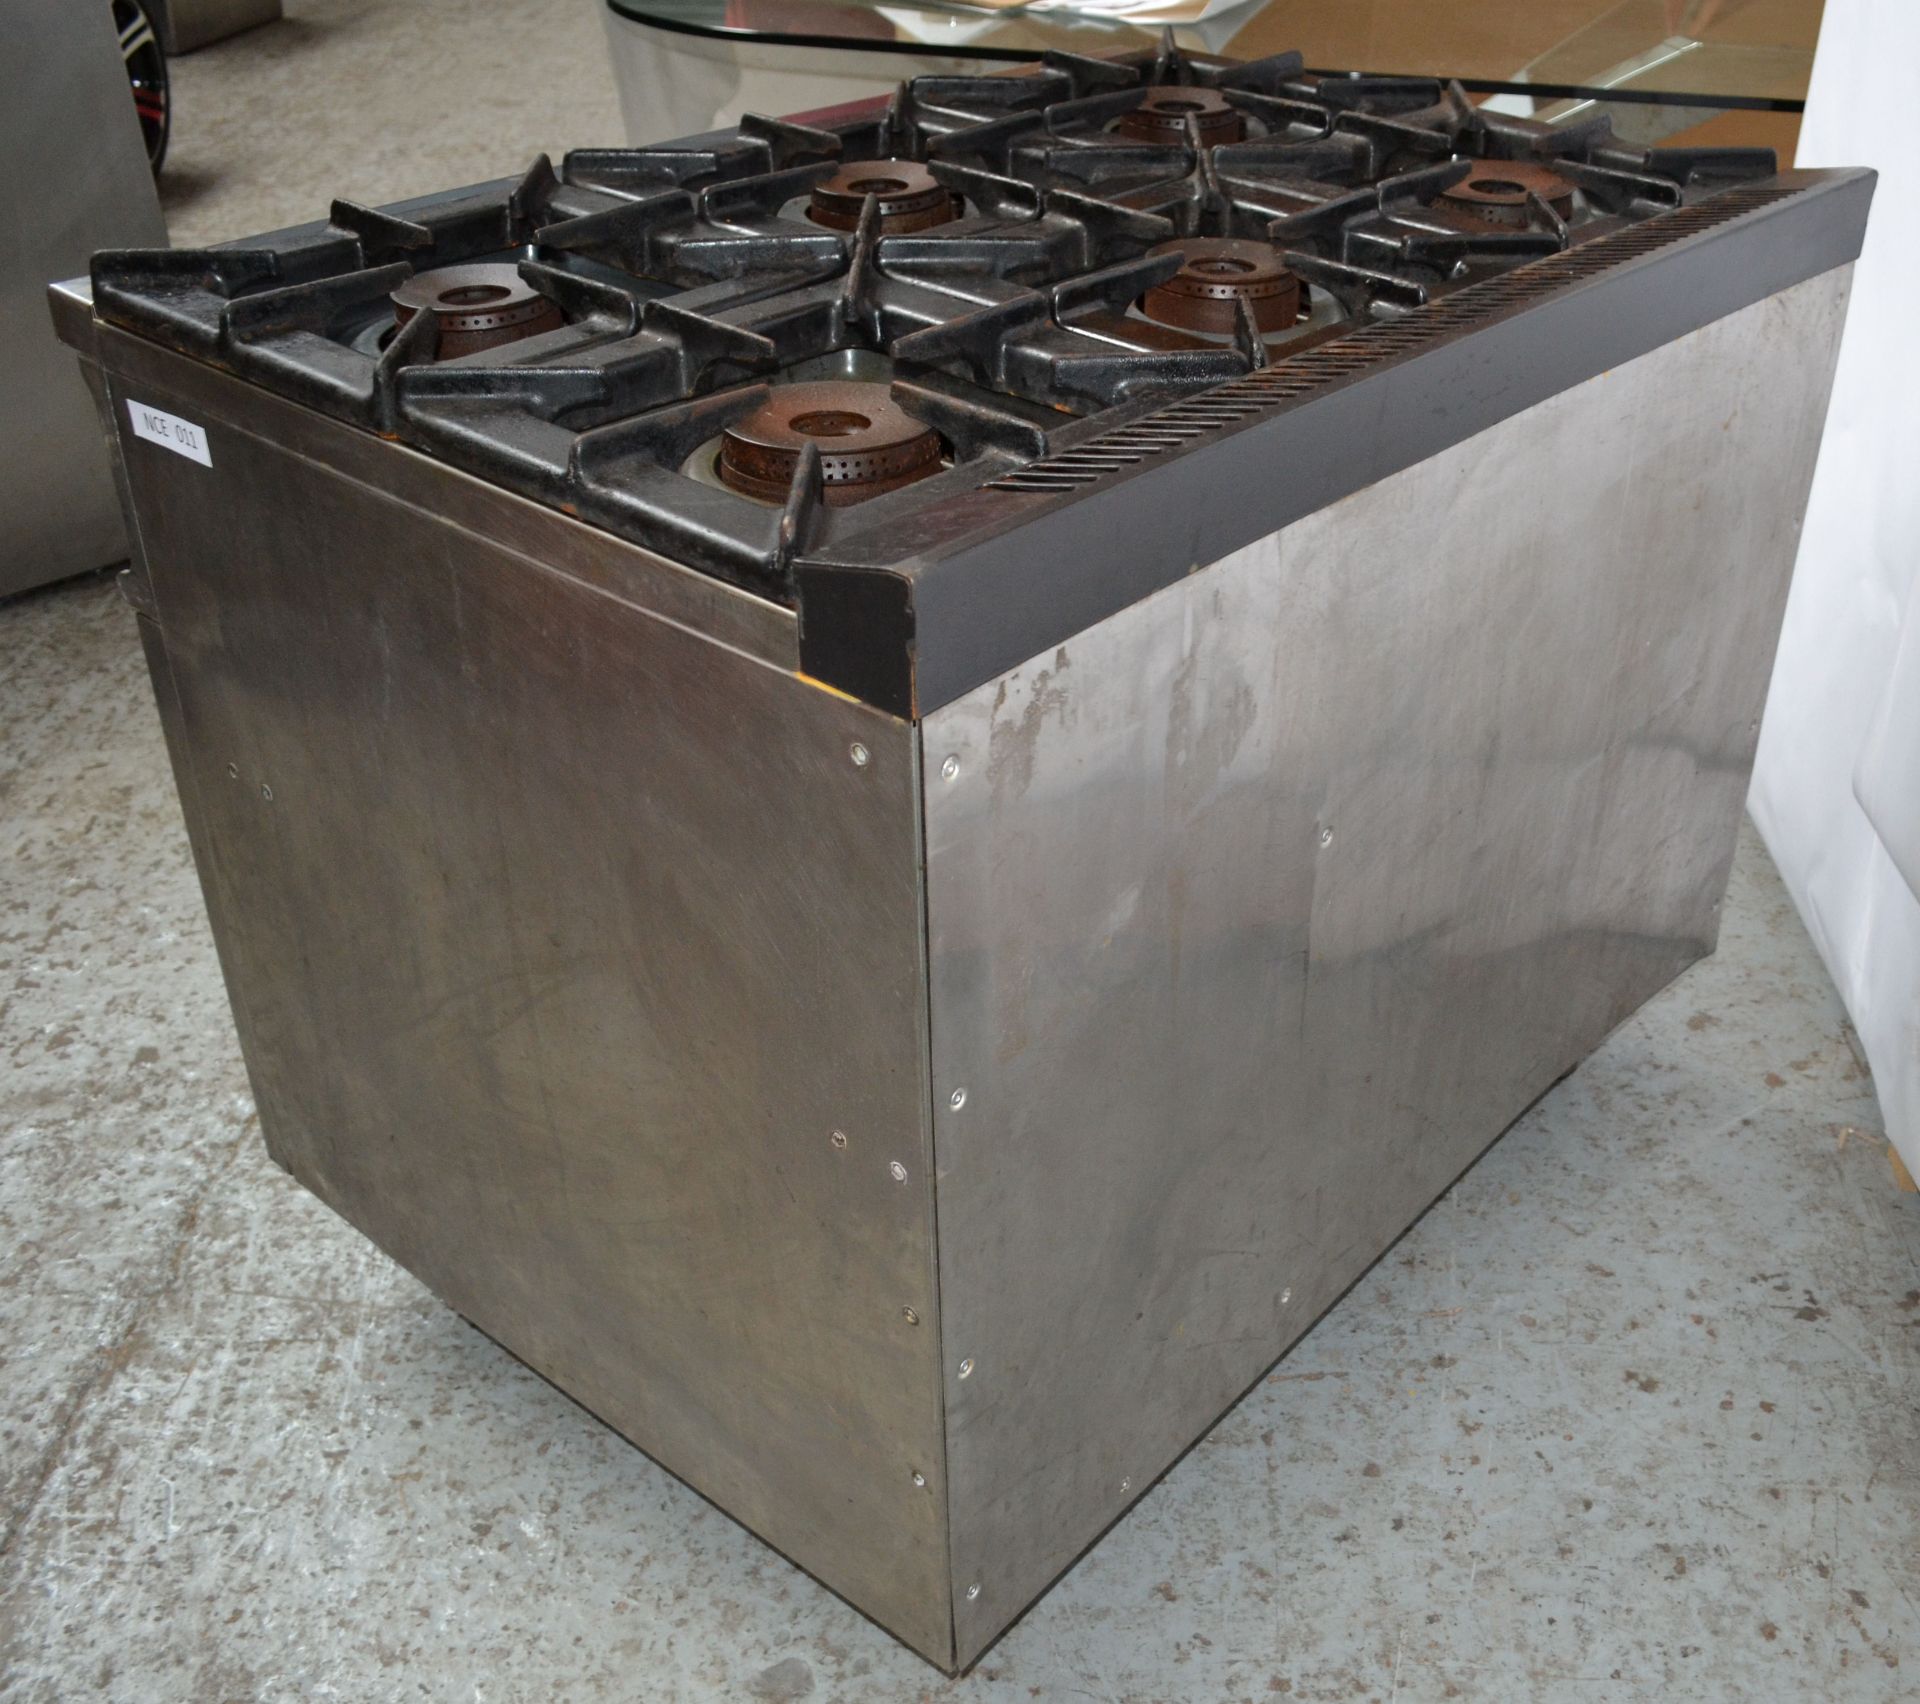 1 x Fagor Six Burner Gas Oven Range (CG-761 BR SM) - Ref NCE011 - CL178 - Location: Altrincham - Image 15 of 15